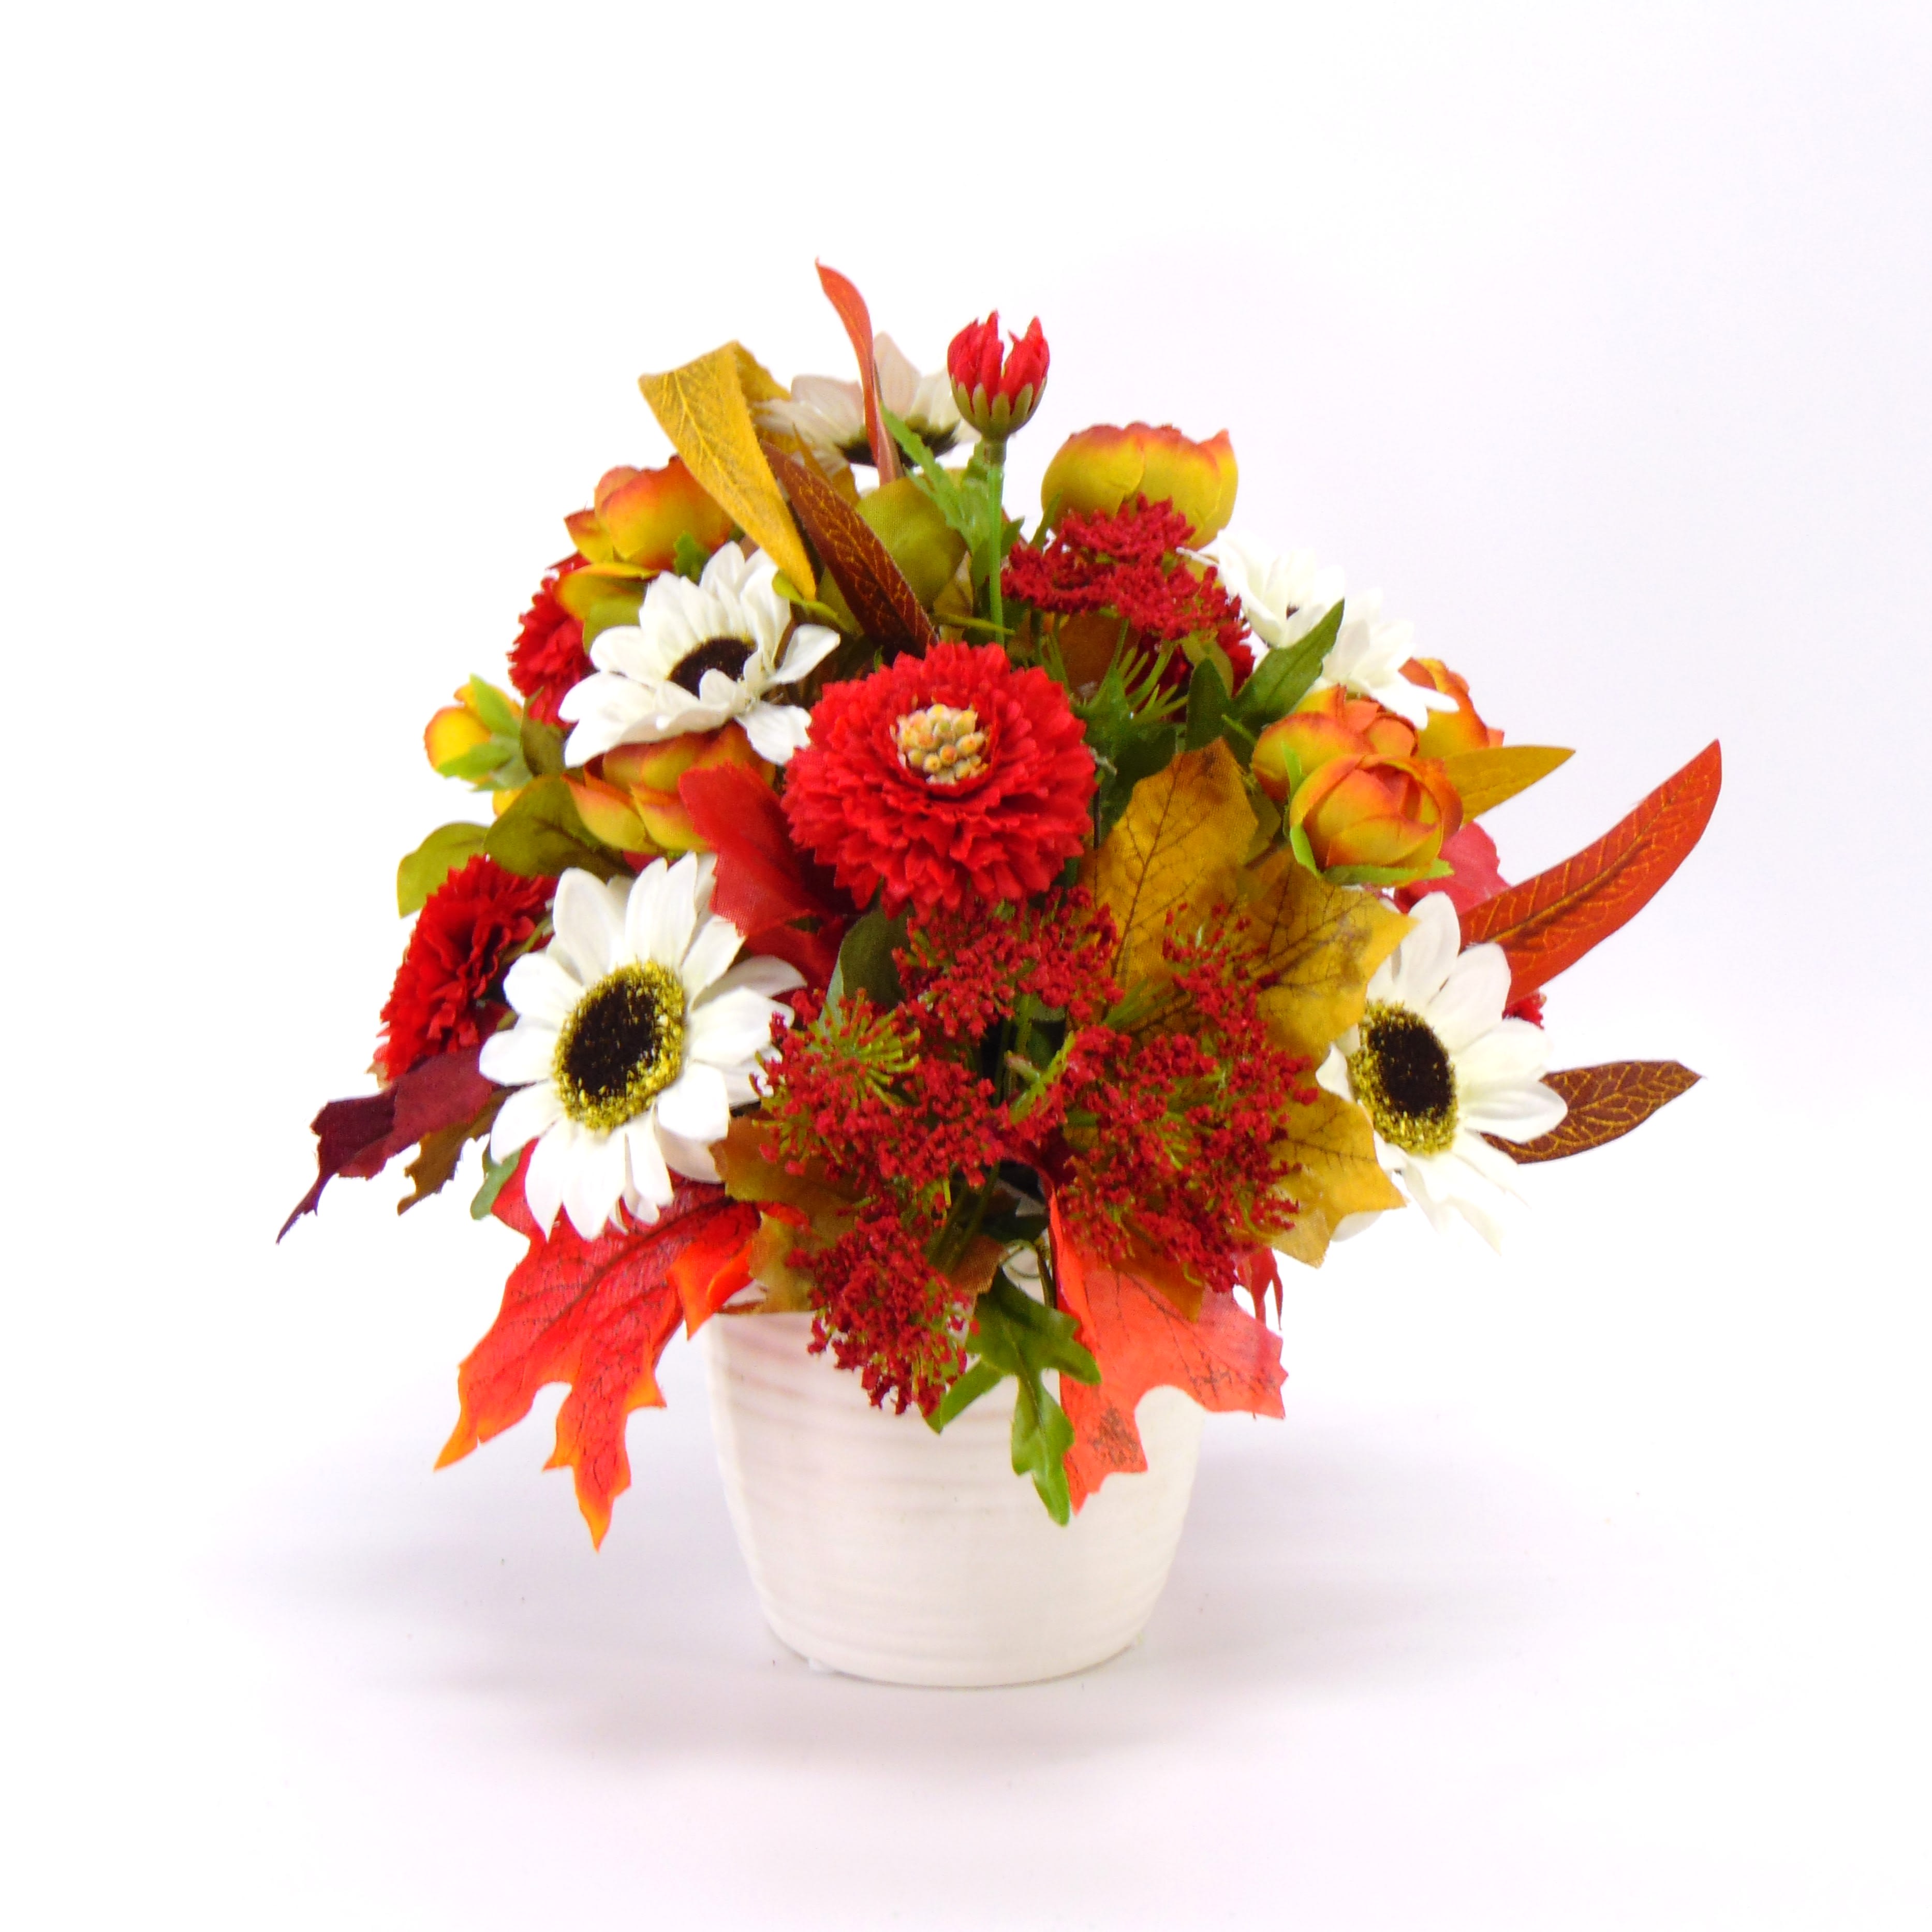 Autumn Reds Silk Design - All-around silk arrangement with shades of red, fall leaves. white sunflowers and accents in a white ceramic pot.